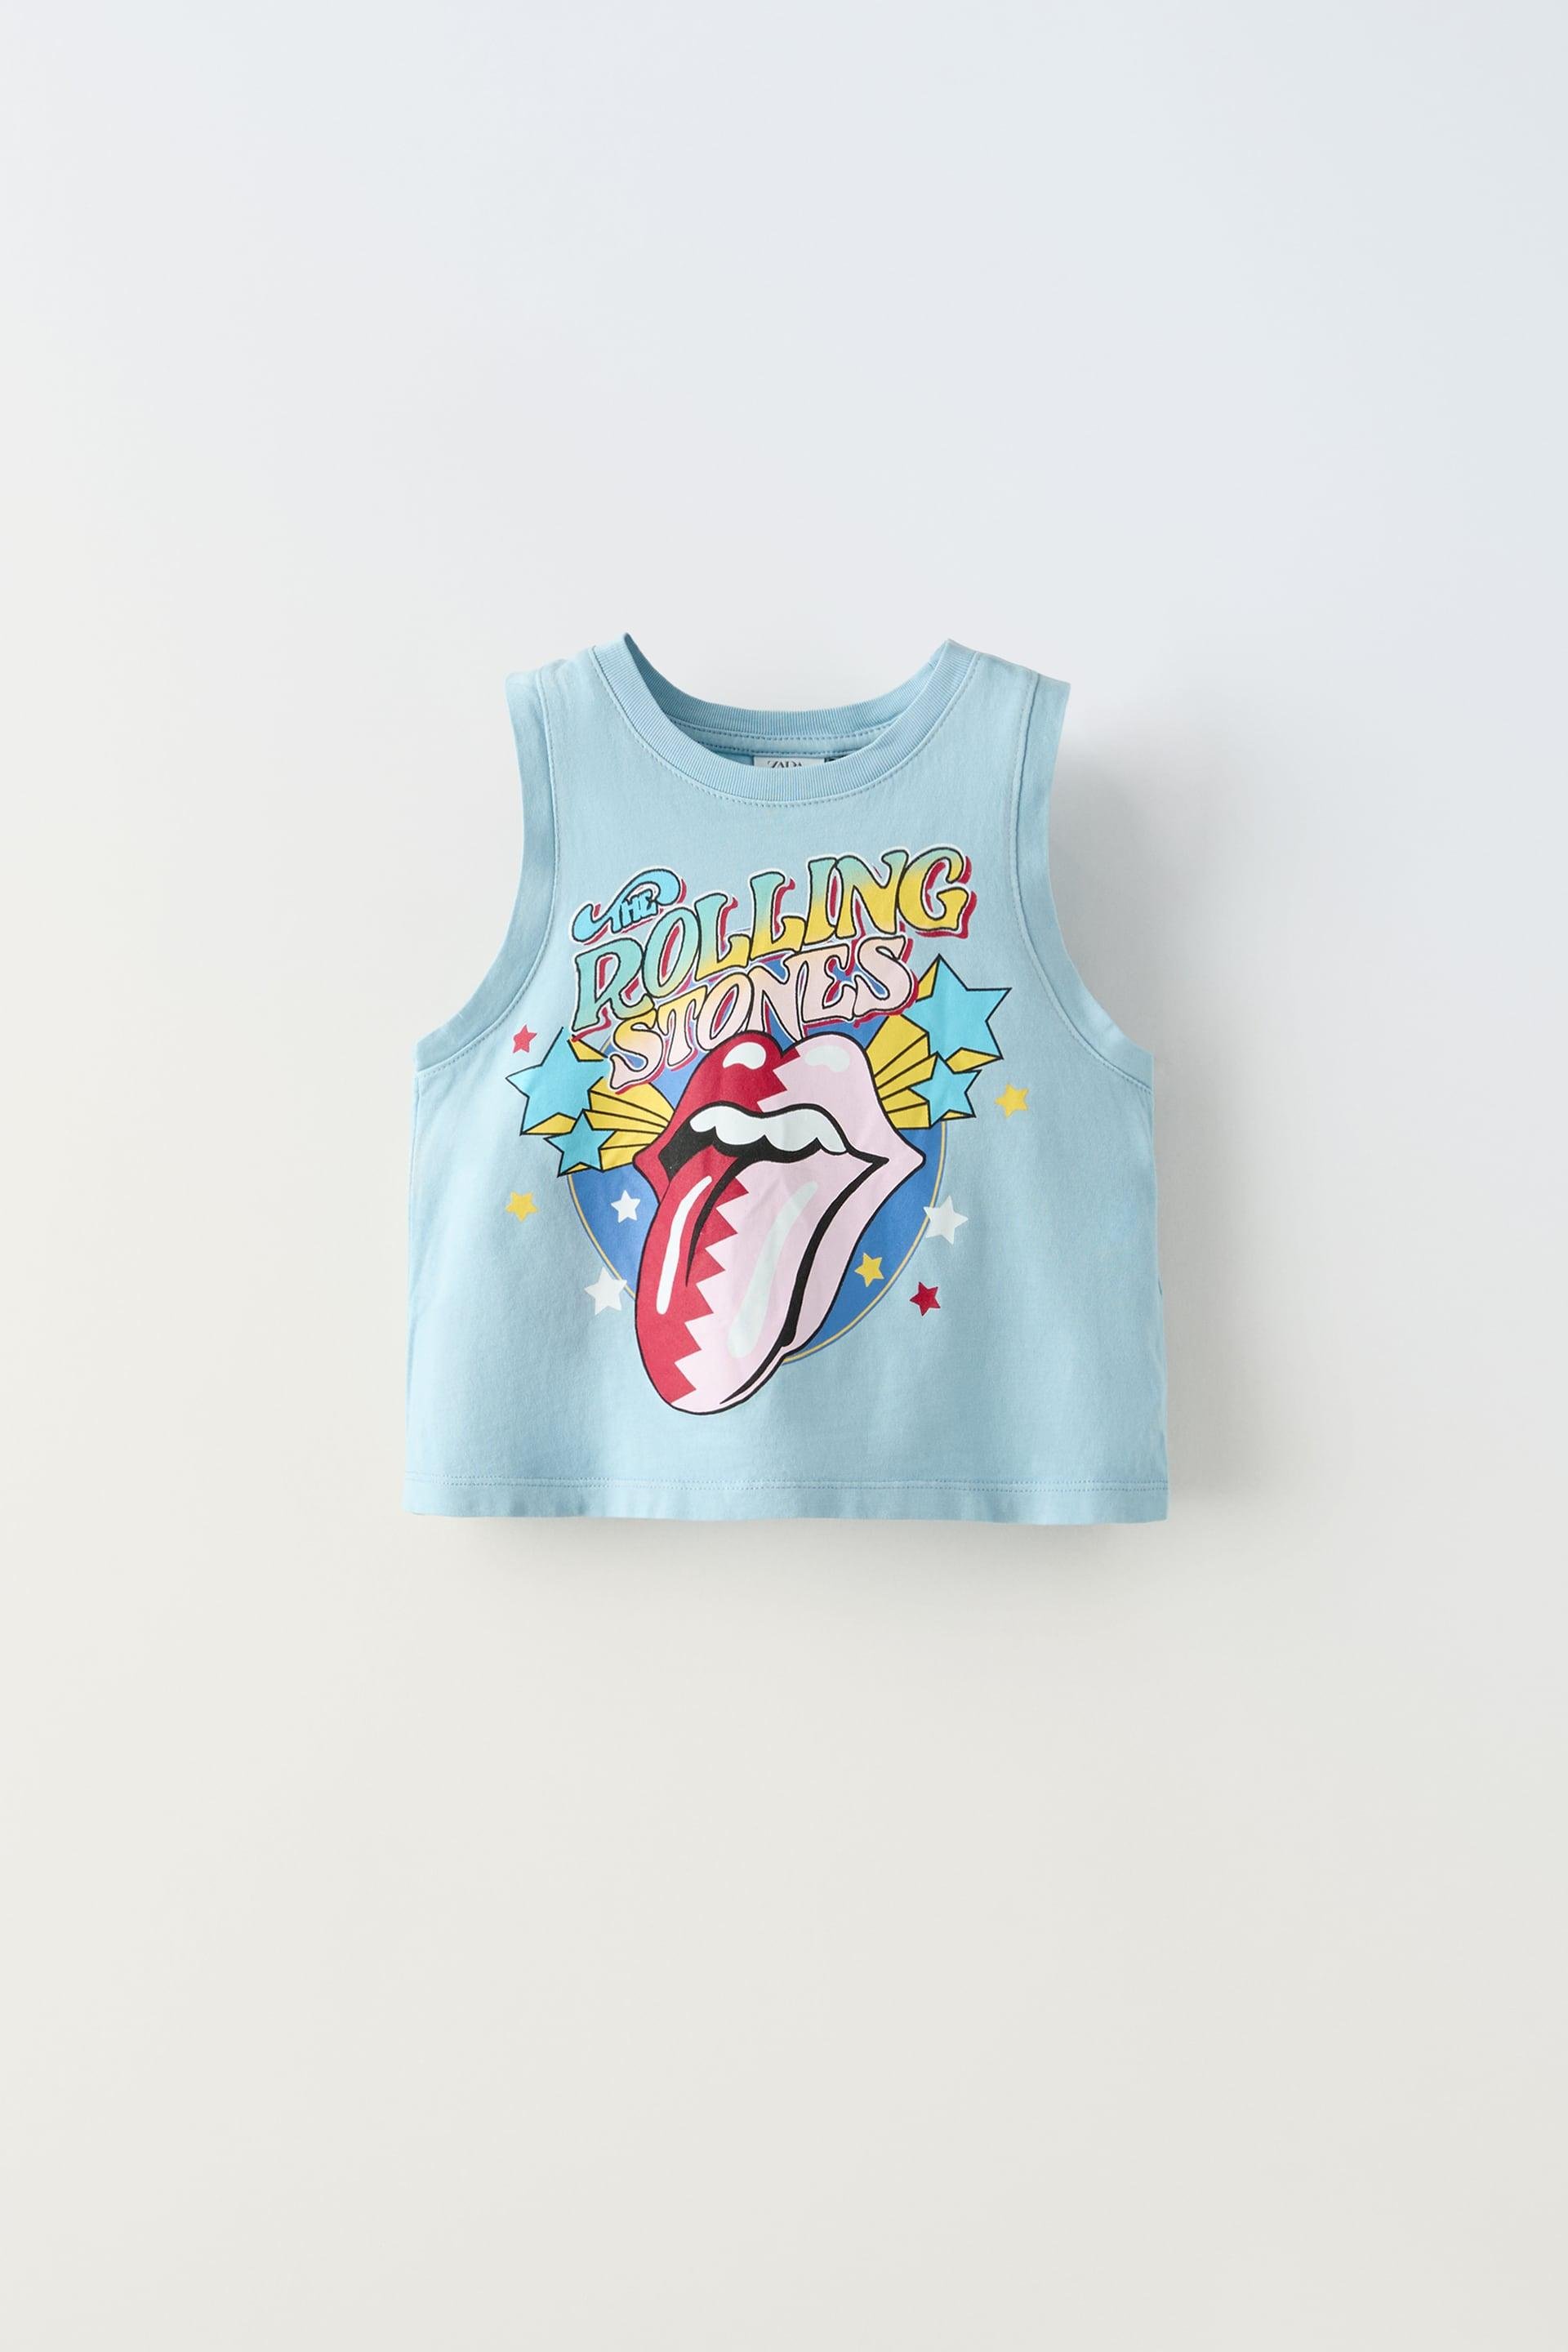 WASHED EFFECT THE ROLLING STONES ® TANK TOP by ZARA